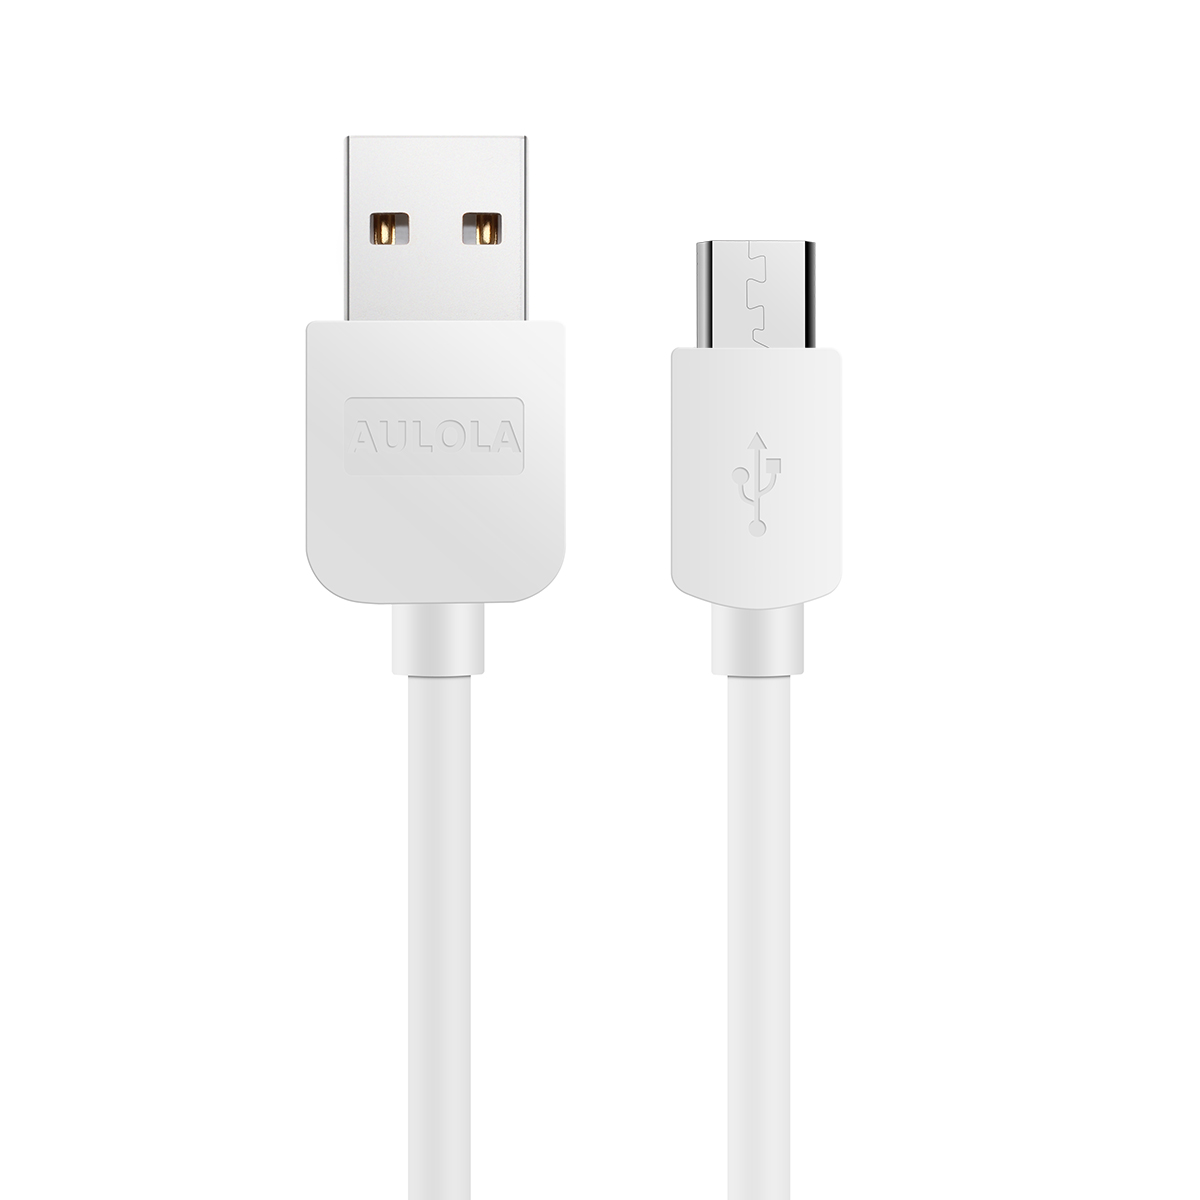 White 1M Meter Long USB Charger Cable